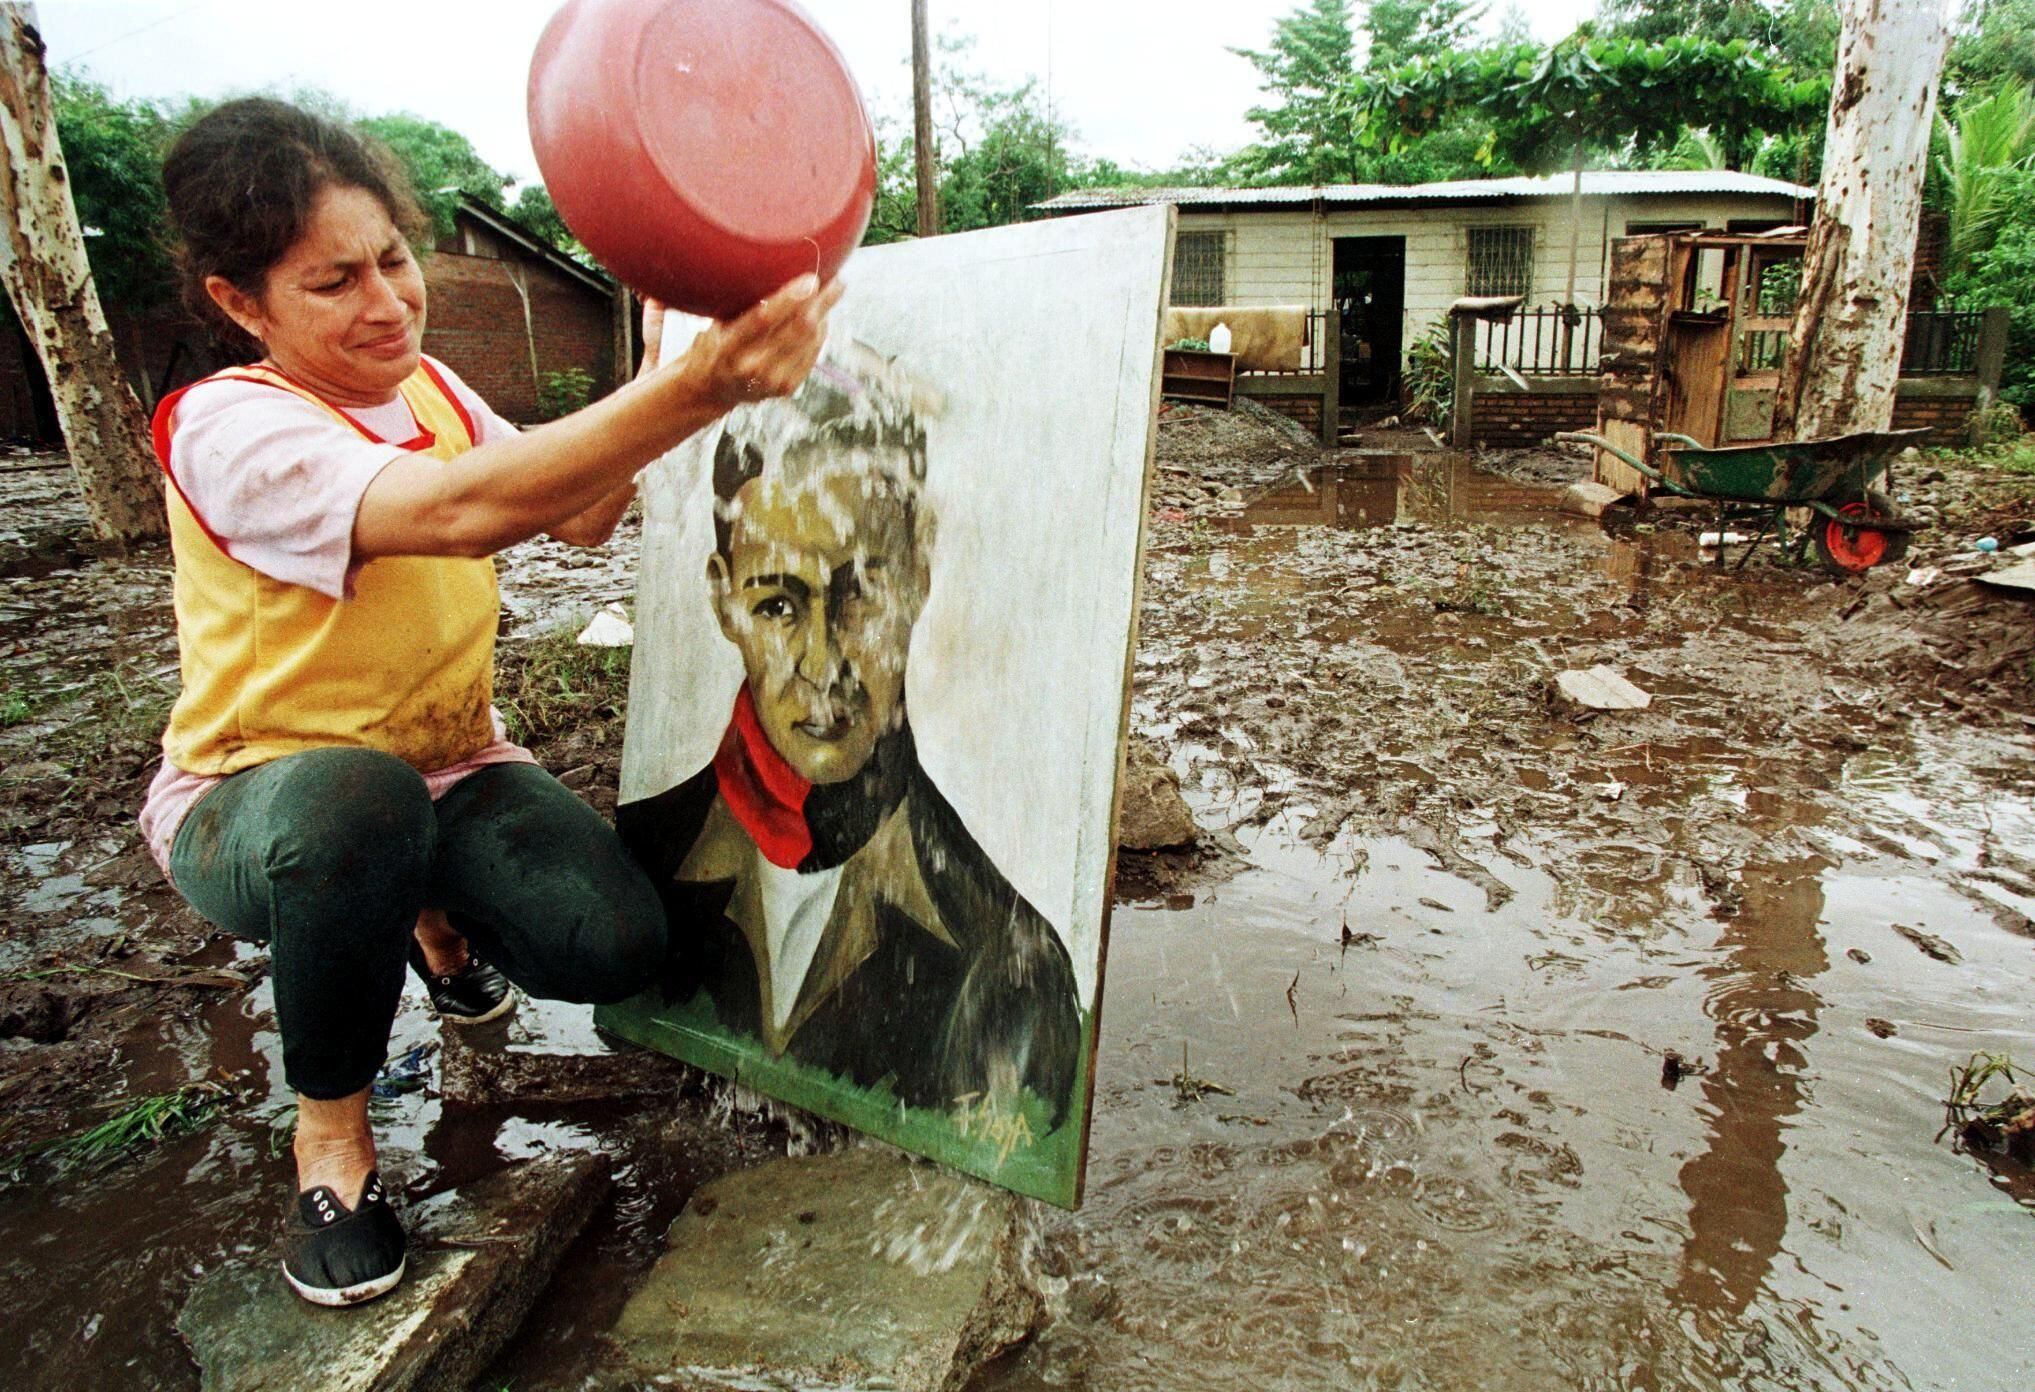 A Nicaraguan woman cleans mud from Sandino's portrait after suffering the devastation of Hurricane Mitch in 1998. (GETTY IMAGES).